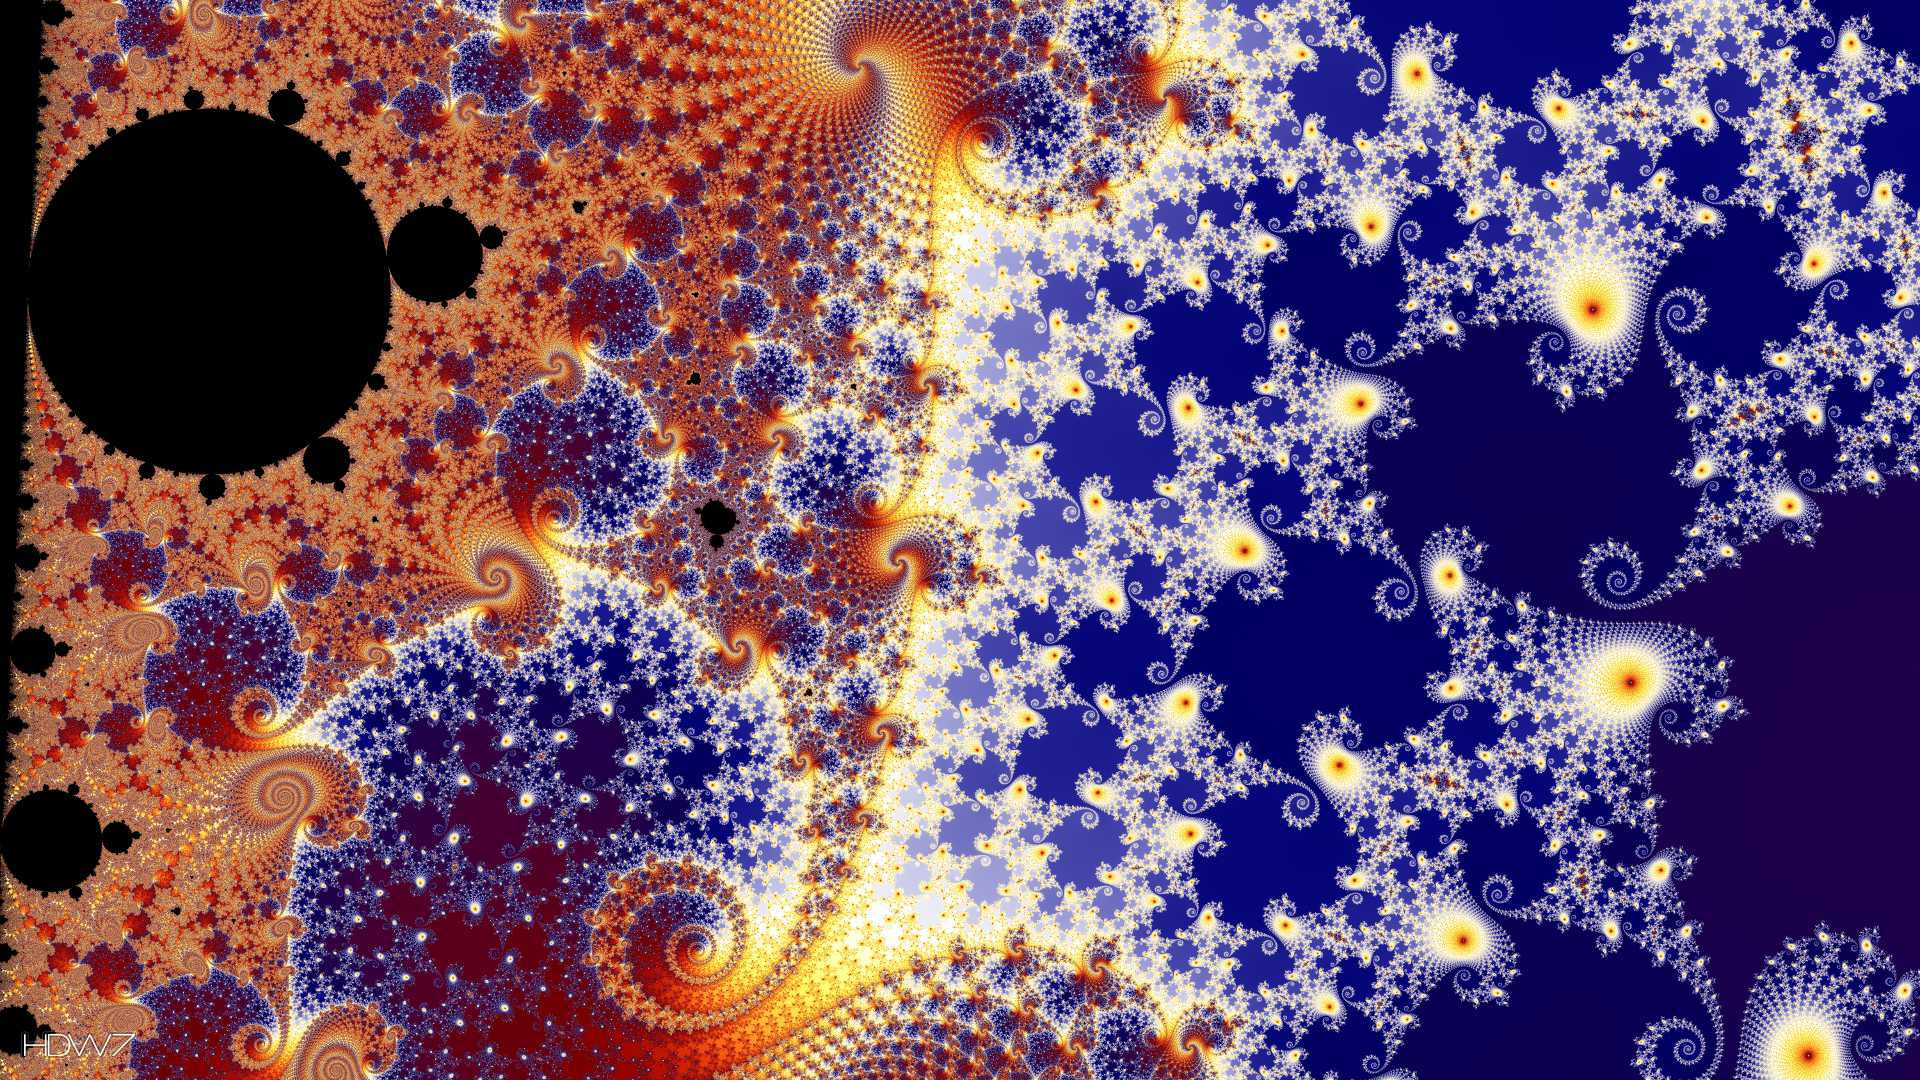 1920x1080 seahorse valley of the map of the mandelbrot set 